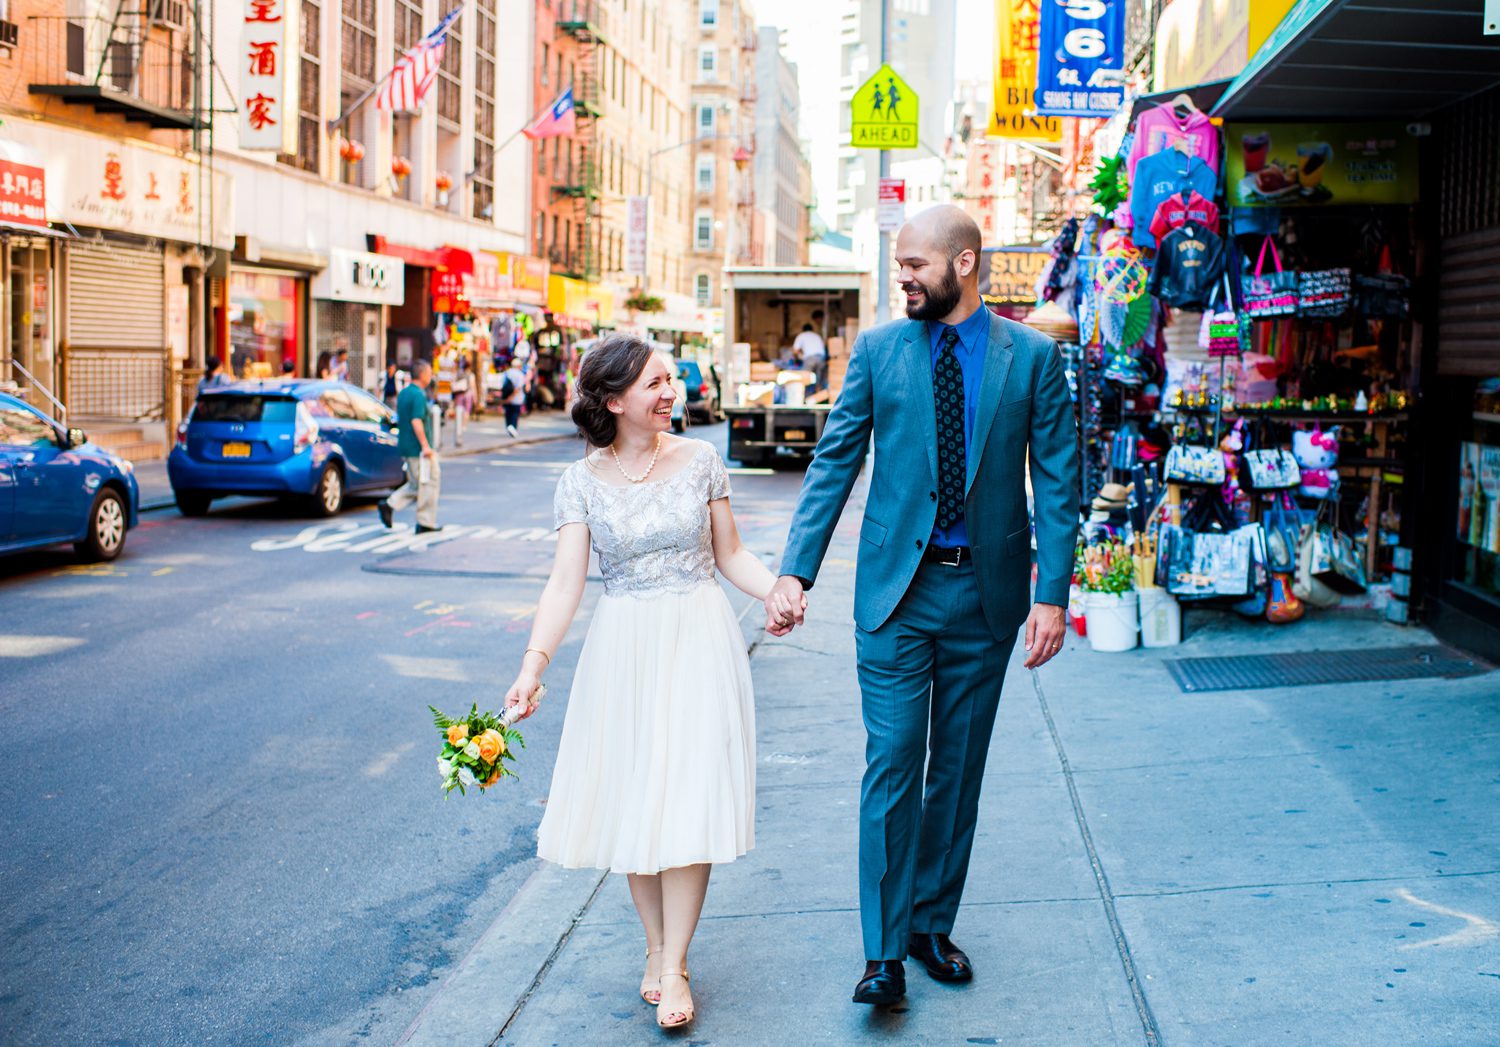 How to Elope in NYC